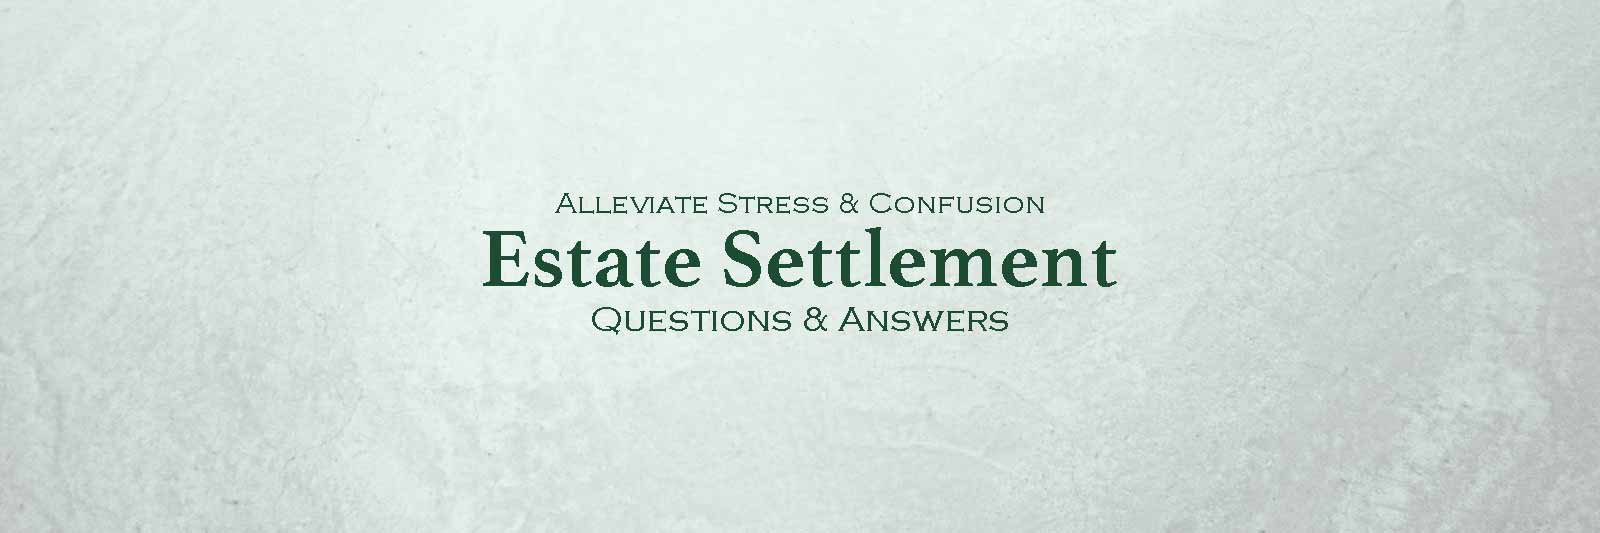 Alleviate Stress And Confusion: Estate Settlement Questions and Answers